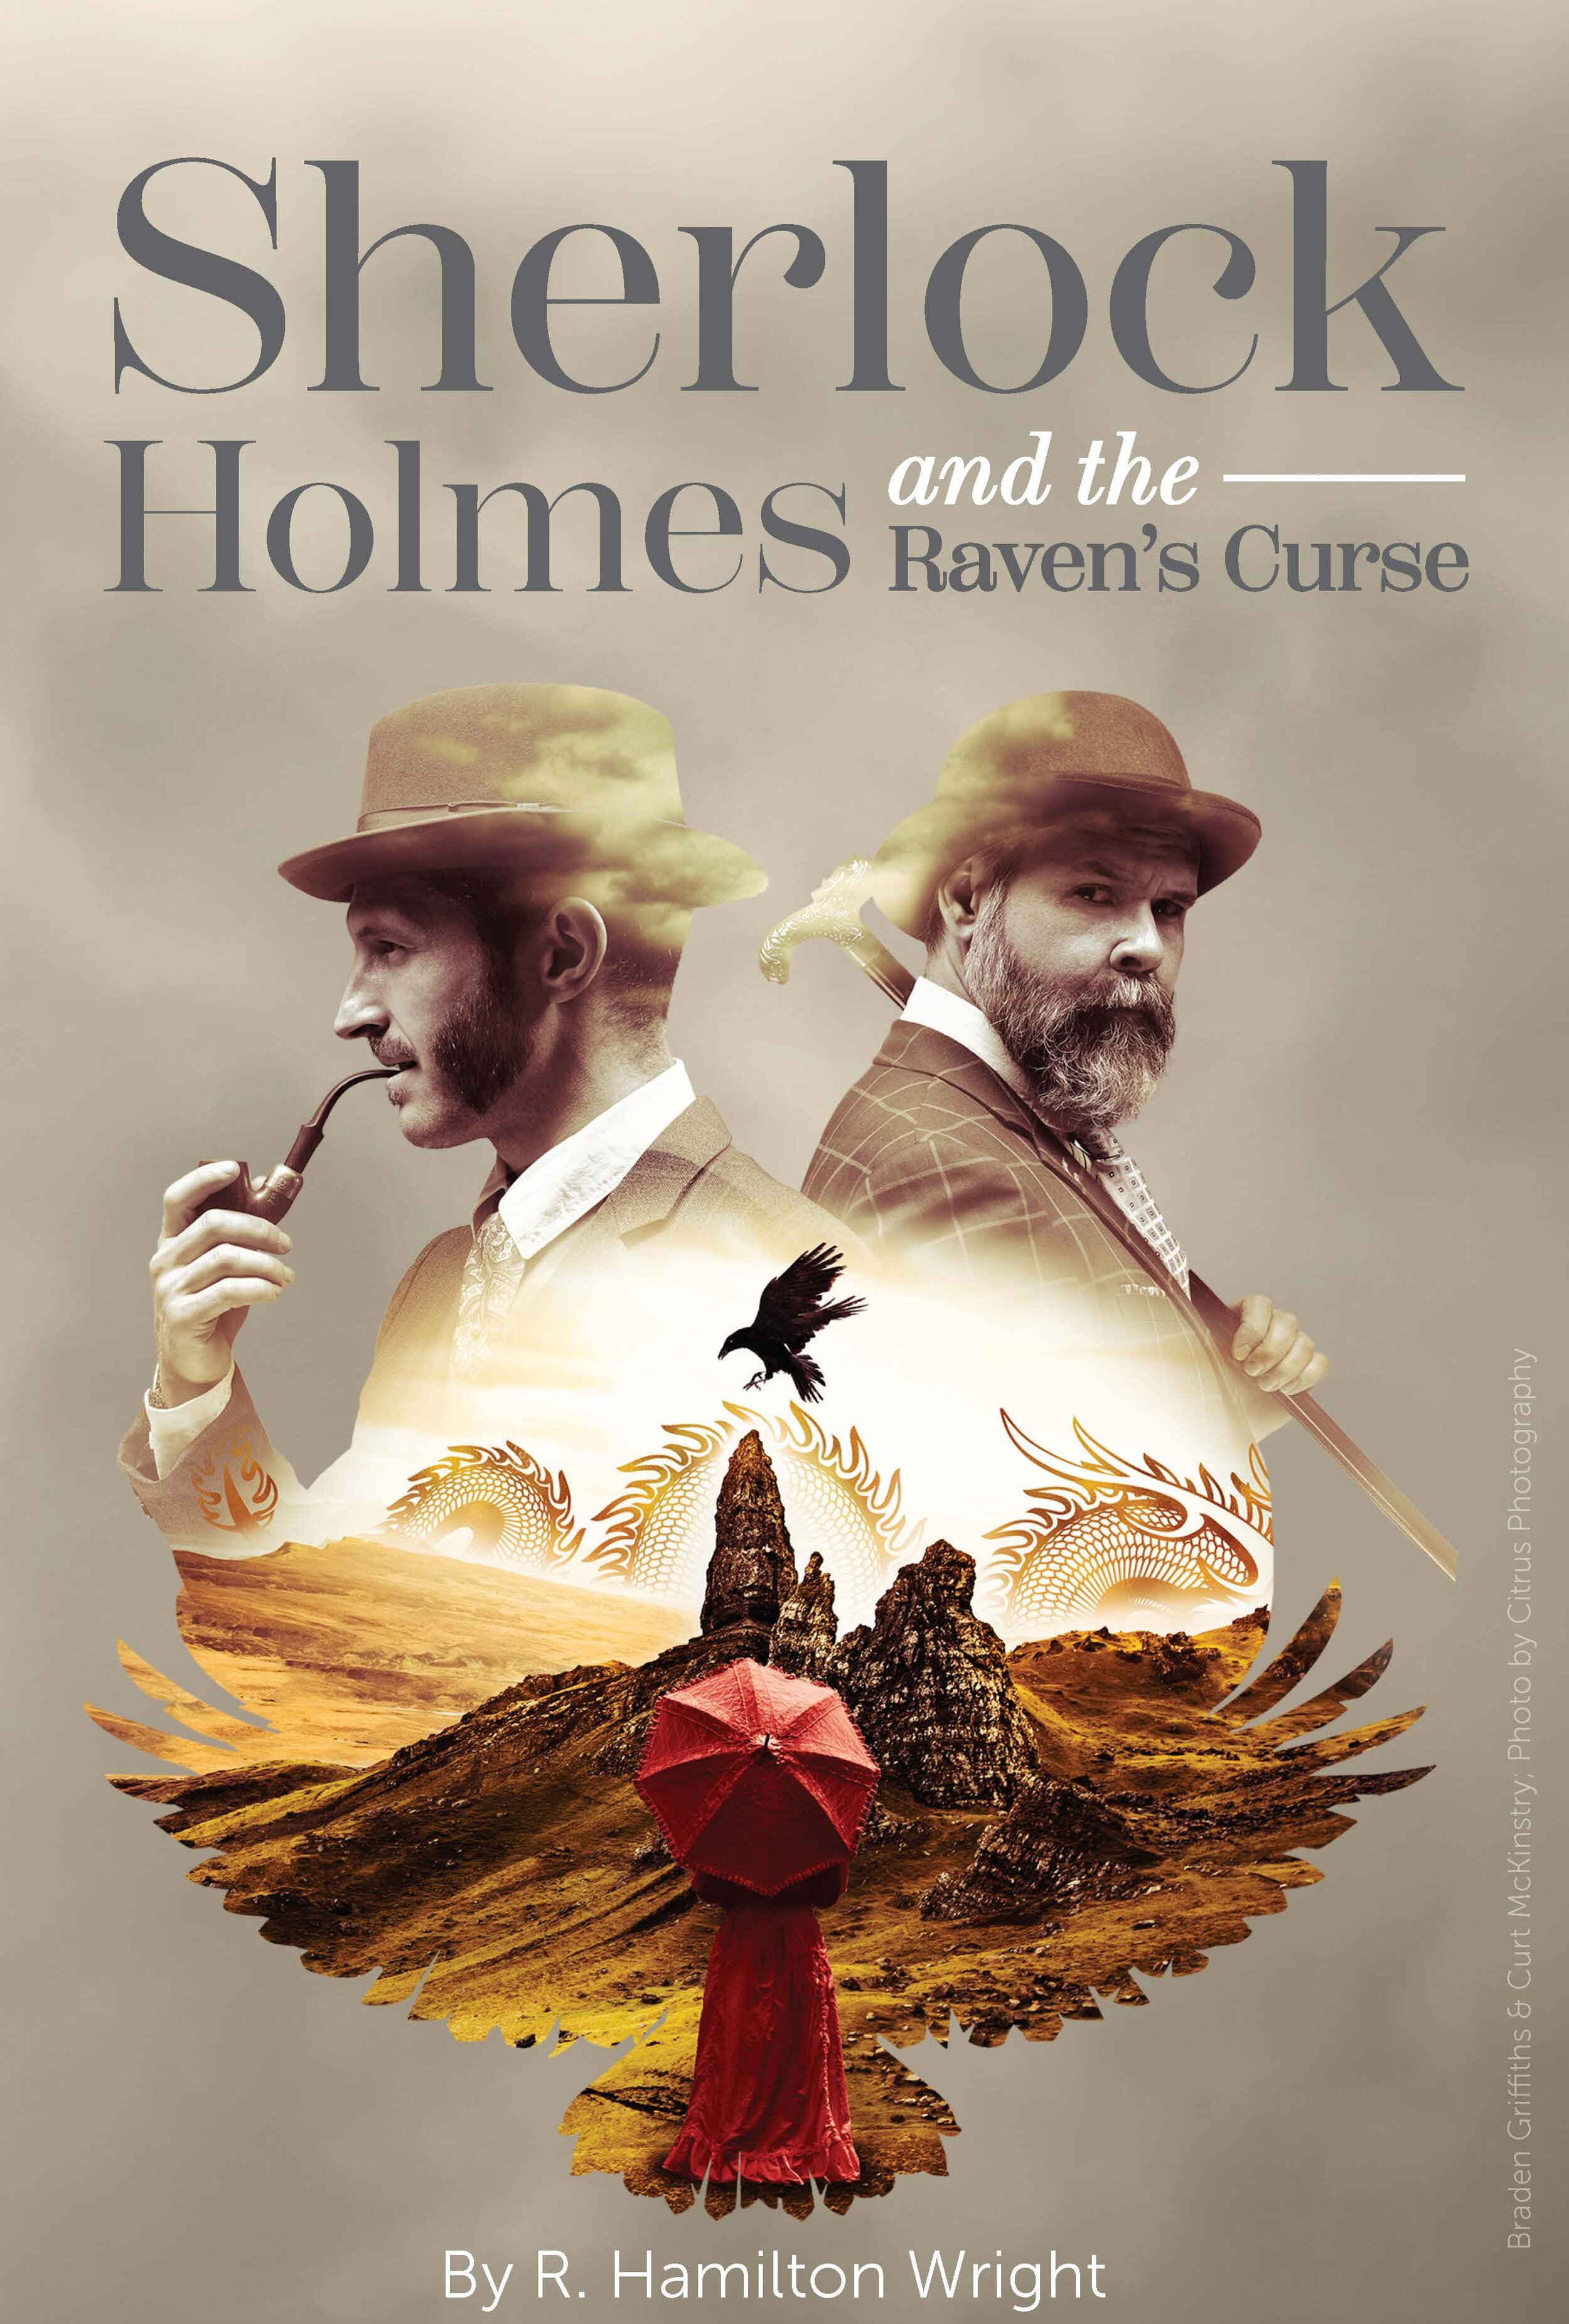 Sherlock Holmes and the Raven's Curve